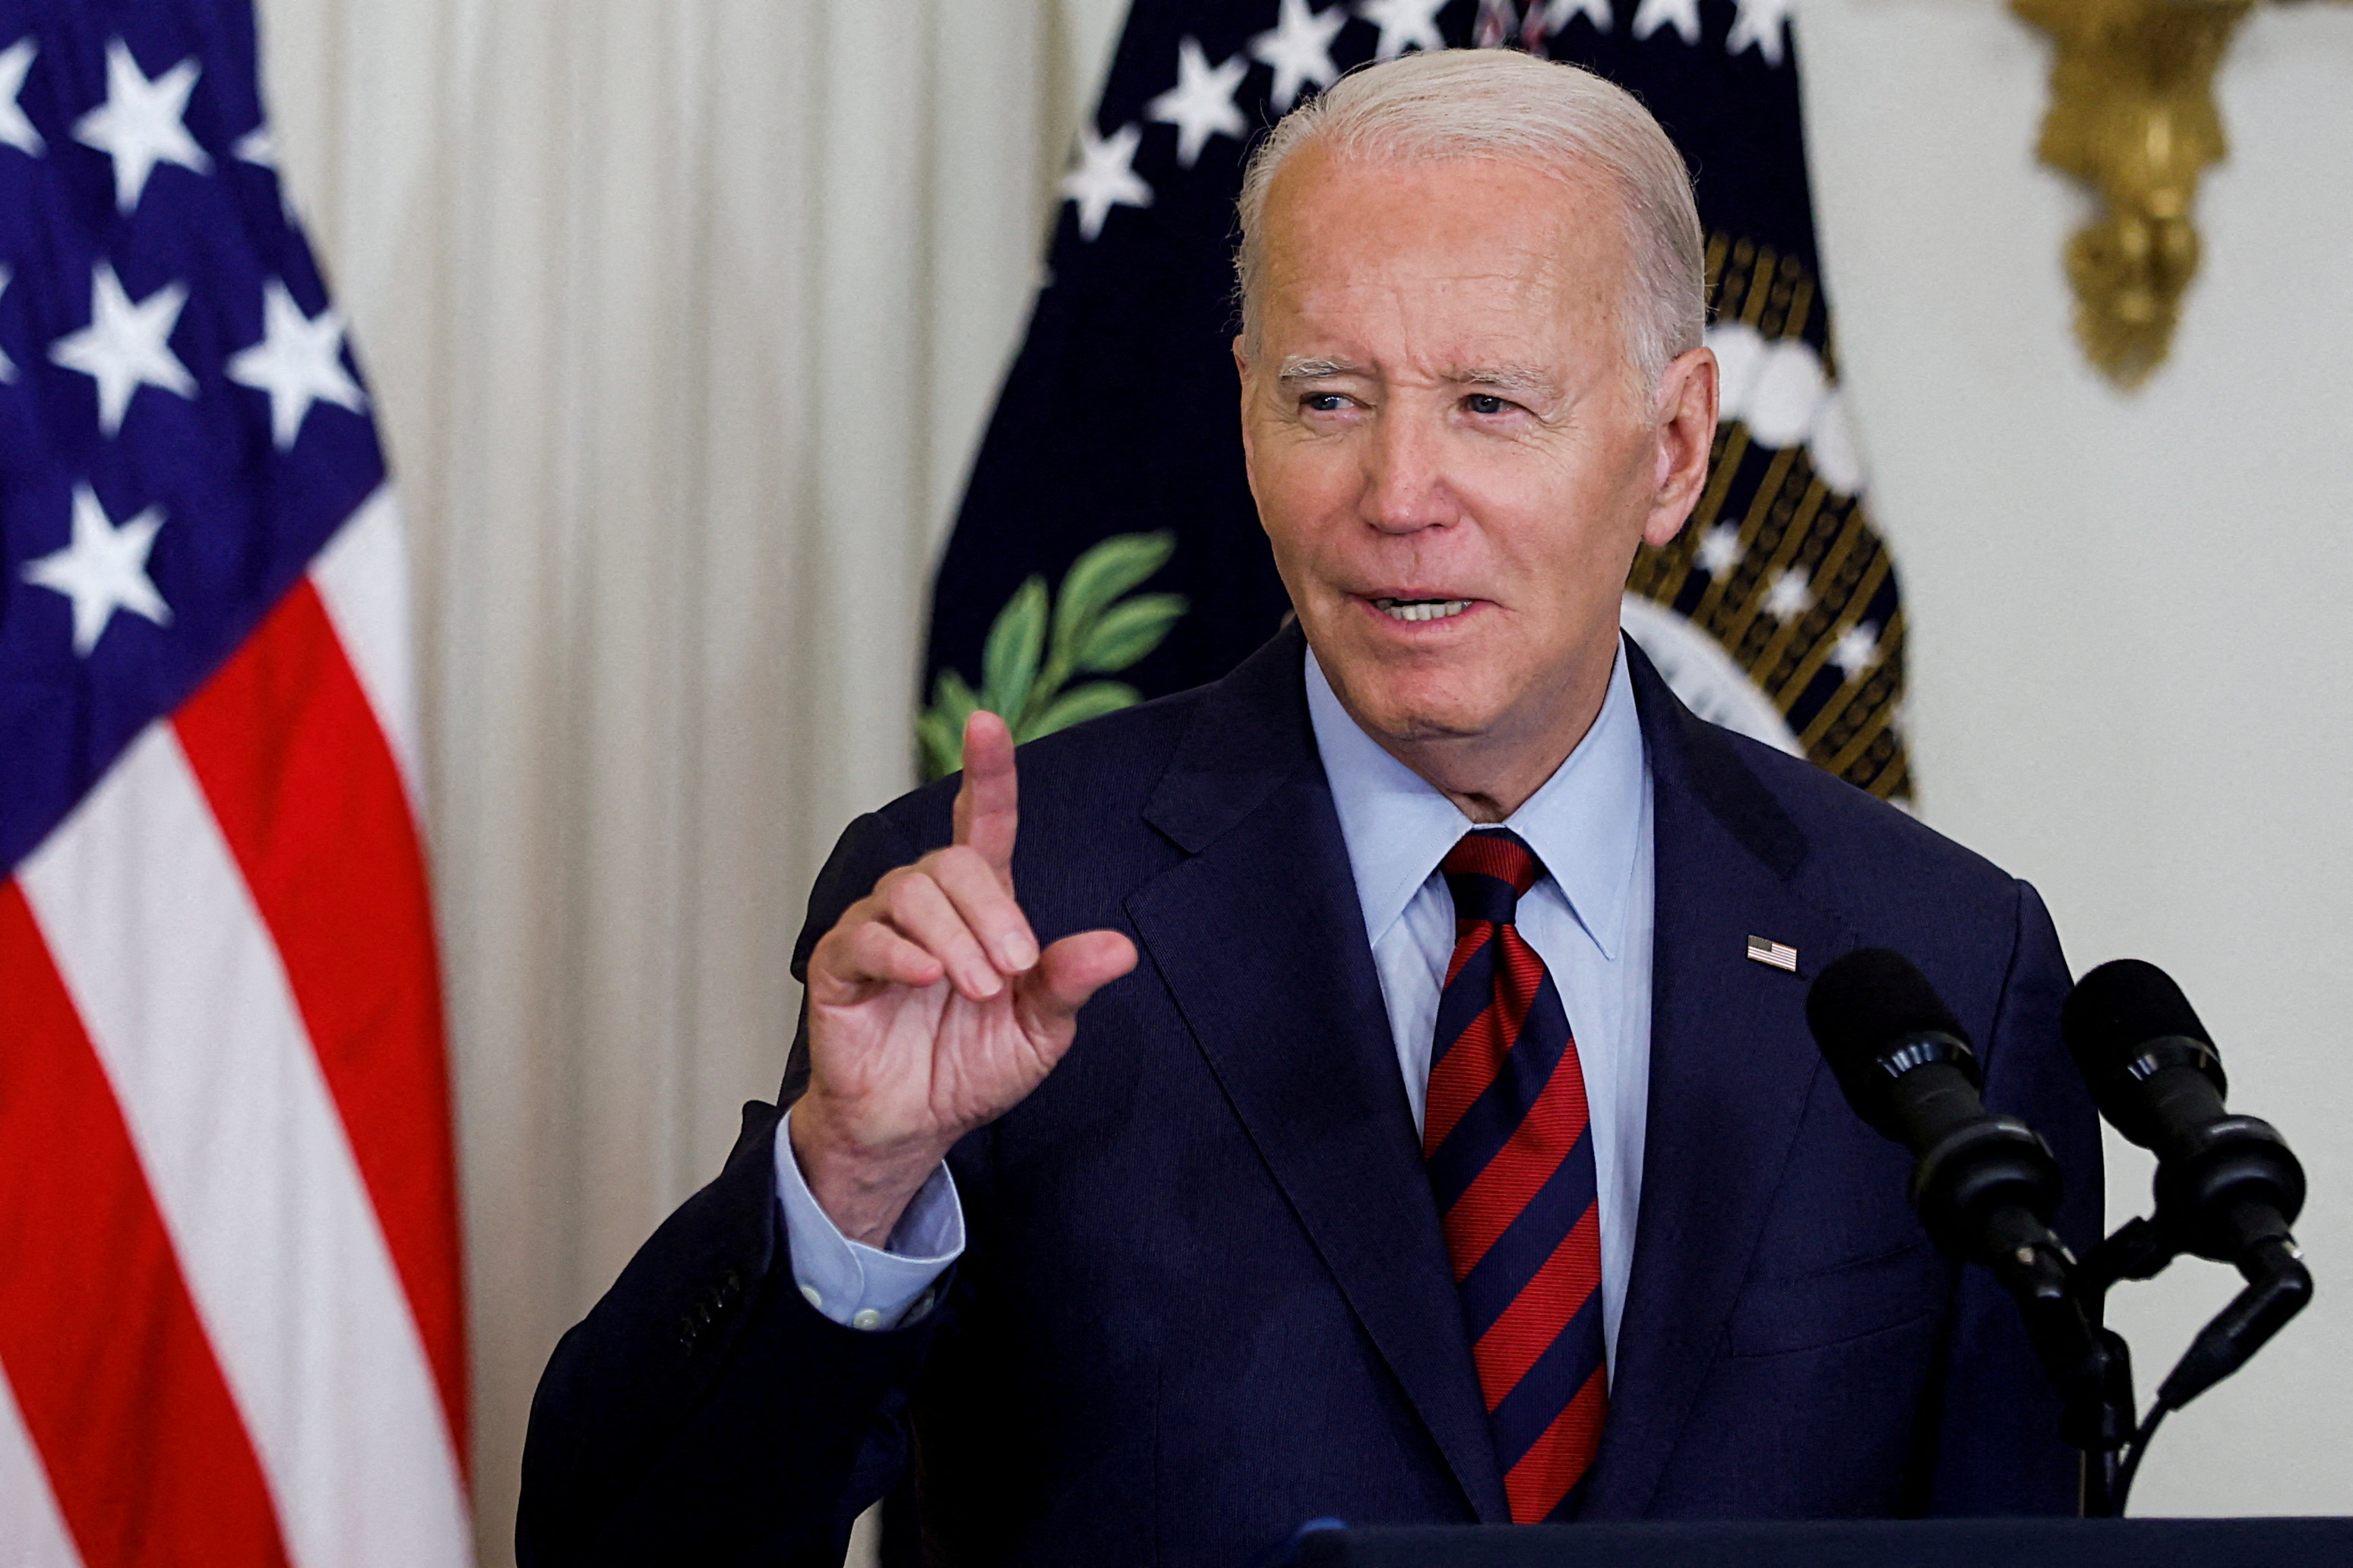 U.S. President Biden delivers remarks on healthcare coverage and the economy, in Washington